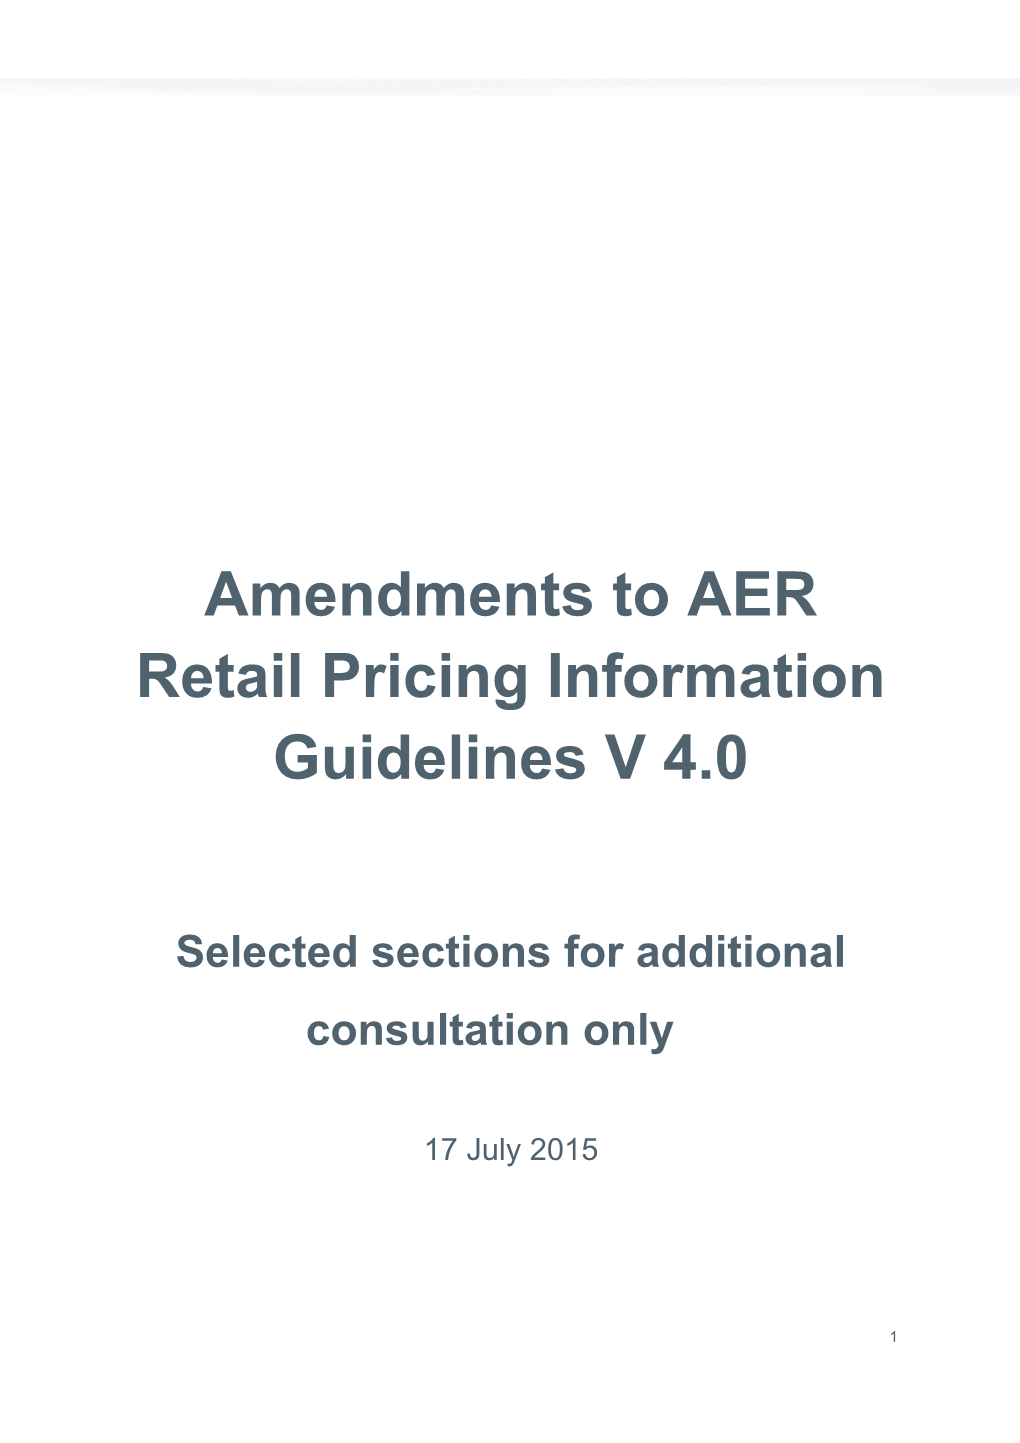 Amendments to AER Retail Pricing Information Guidelines V 4.0